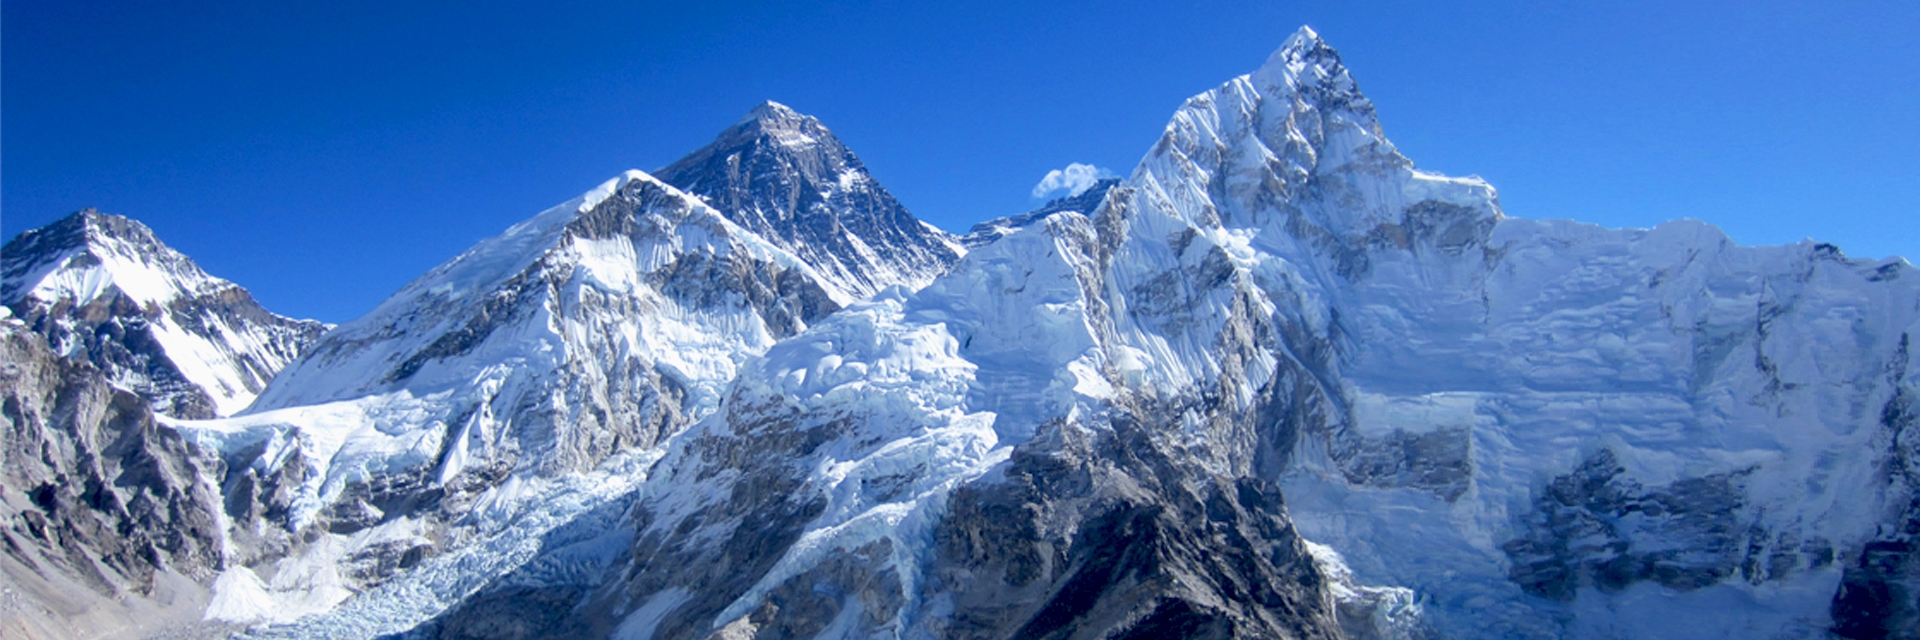 Everest Expedition South